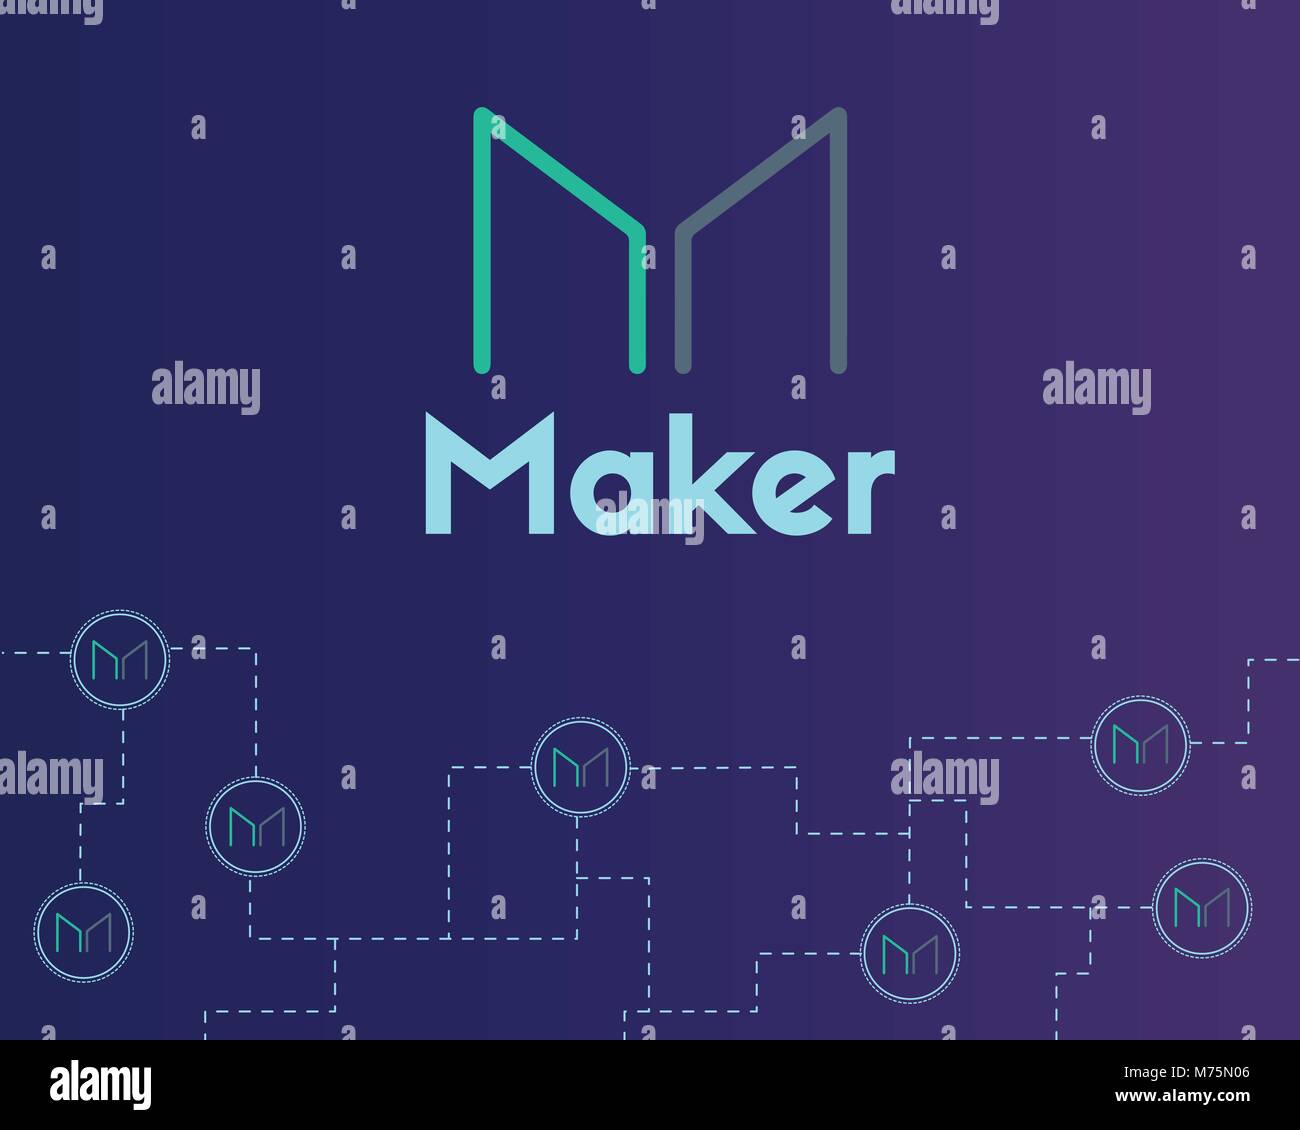 maker crypto currency